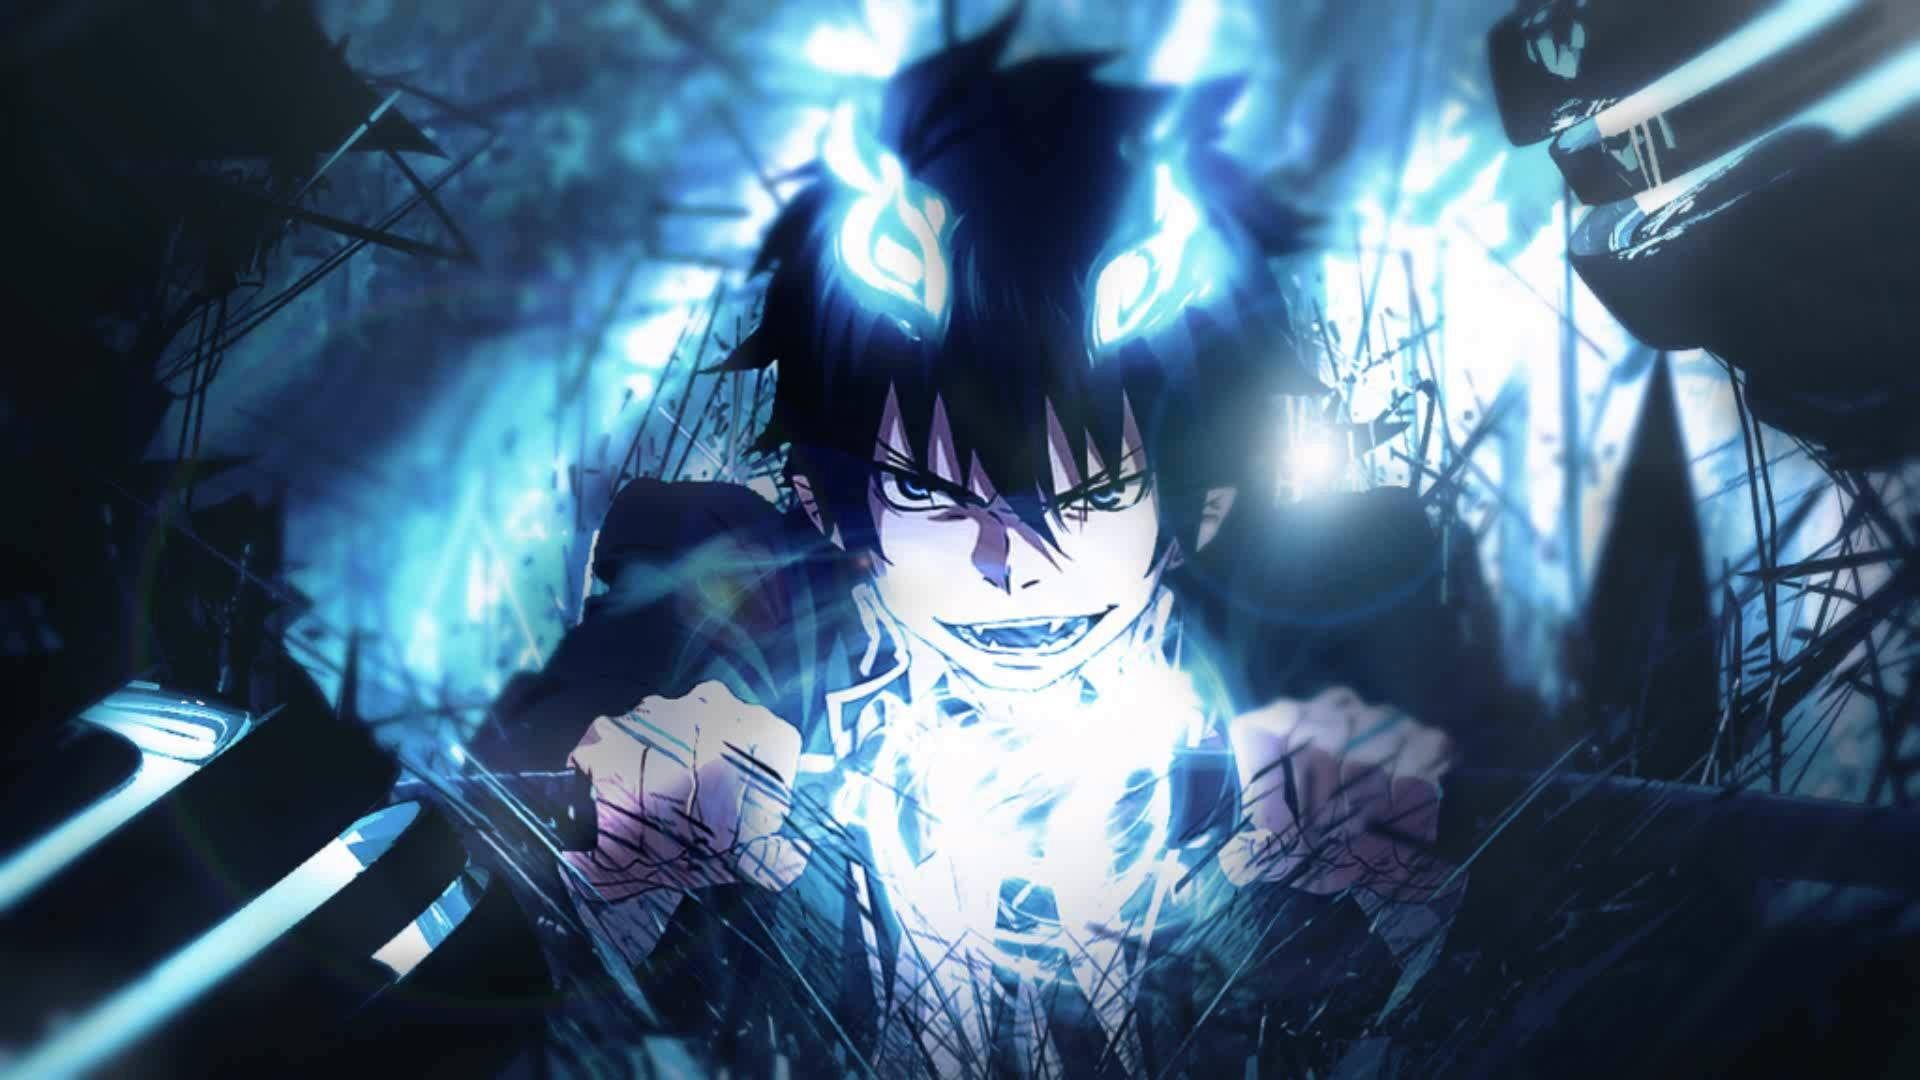 Anime Blue Exorcist Wallpapers Wallpaper Cave